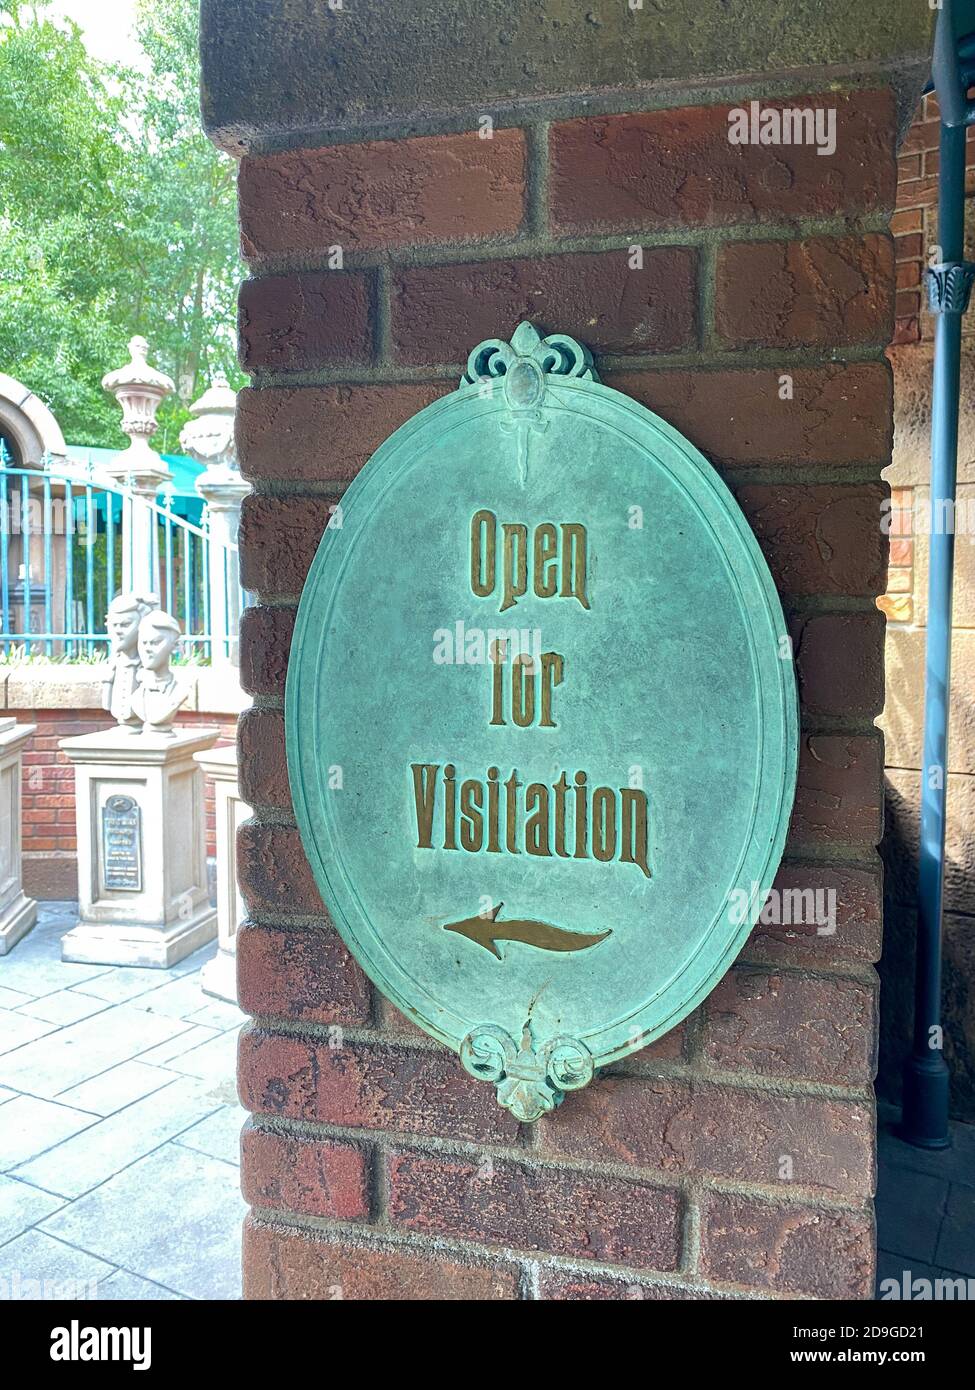 Orlando,FL/USA-10/21/20: The sign that says Open for Visitation outside of the Haunted Mansion ride in the Magic Kingdom at  Walt Disney World Resorts Stock Photo